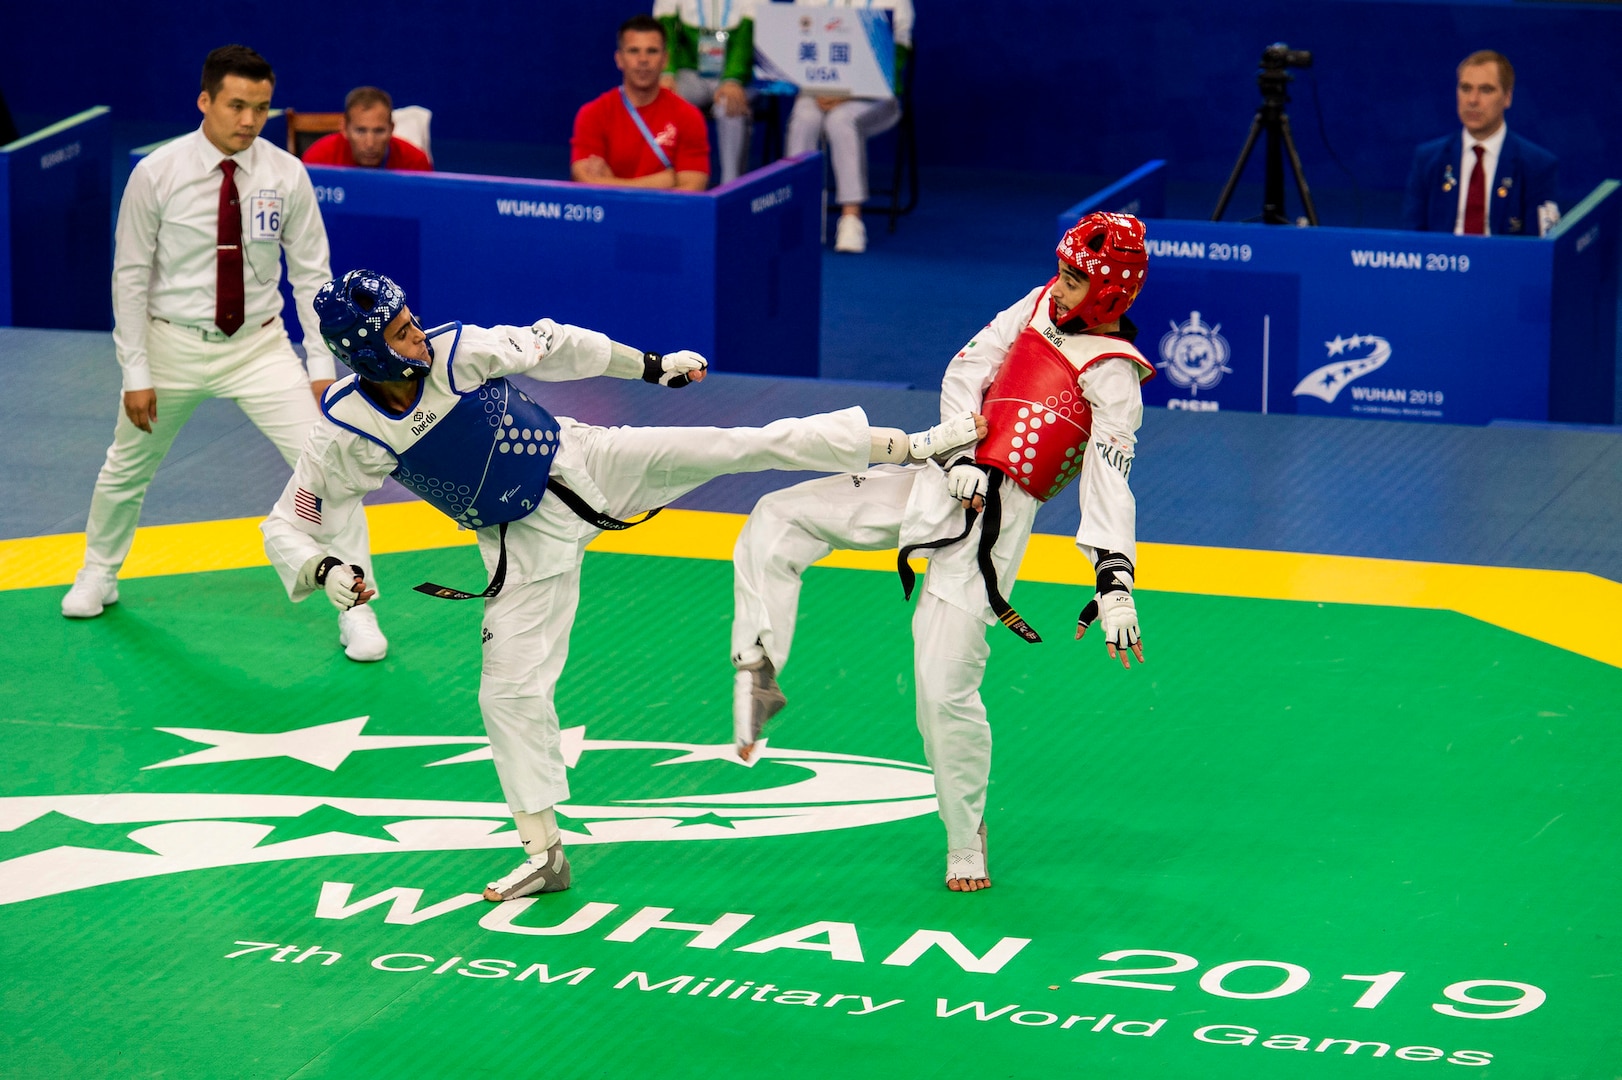 Army Pvt. 2nd Class Juan Carlos Norzagaray-Garcia with the U.S. Armed Forces Taekwondo Team fights Iran's Mahaleh Kalaei Iman at the CISM Military World Games in Wuhan, China, Oct. 26, 2019.  (DoD photo by Mass Communication Specialist 1st Class Ian Carver)